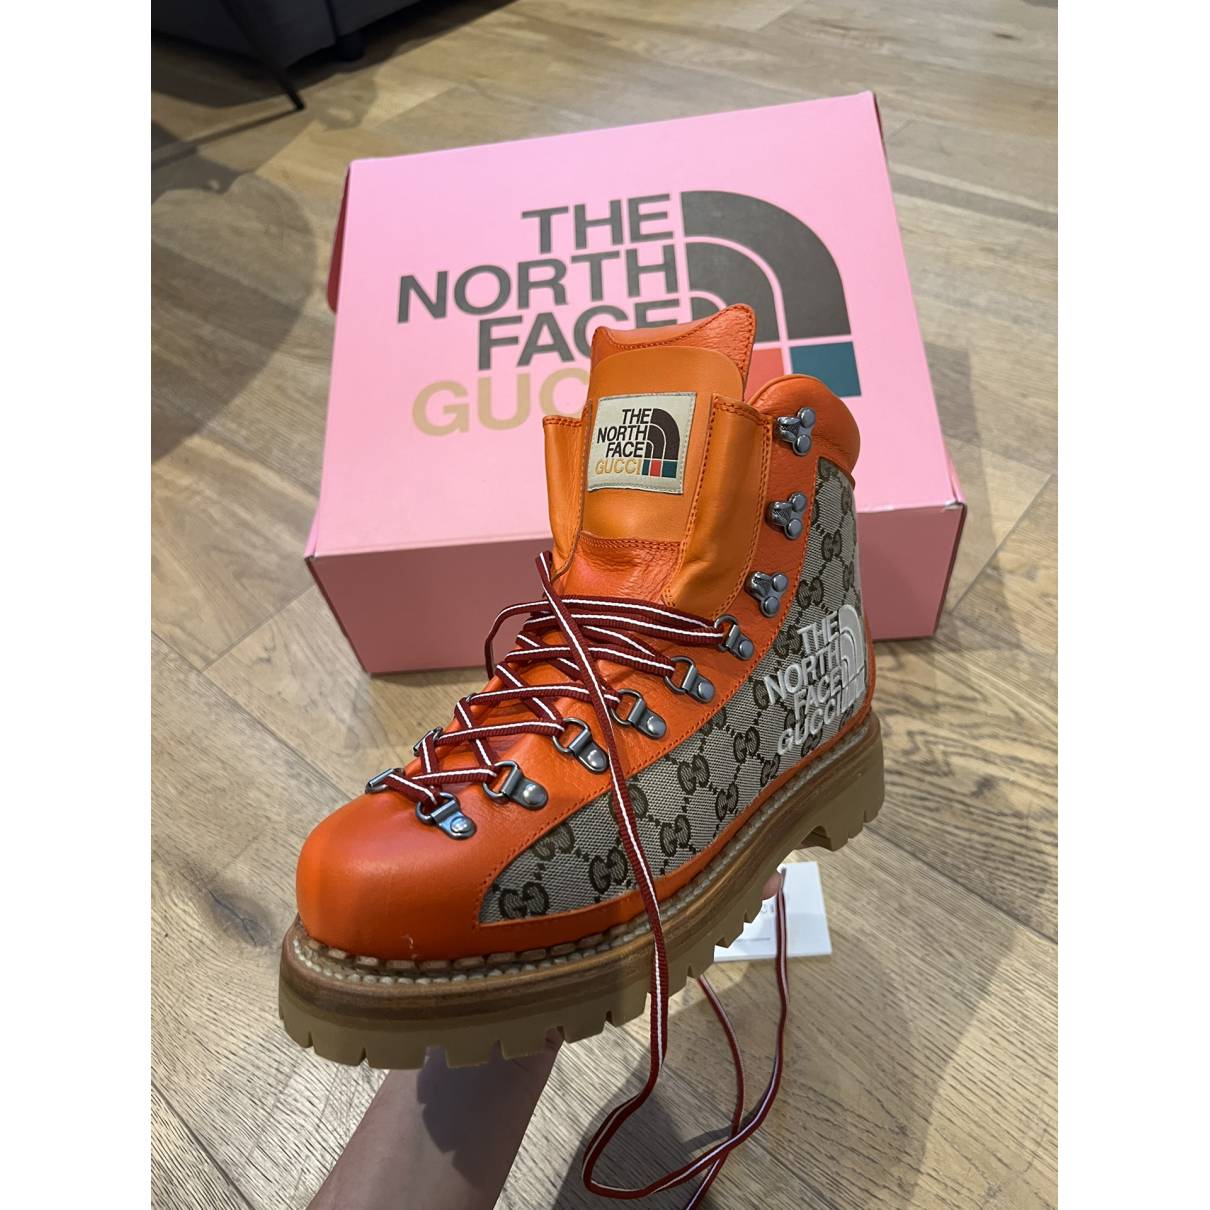 The North Face x Gucci - Authenticated Boots - Leather Orange for Men, Never Worn, with Tag